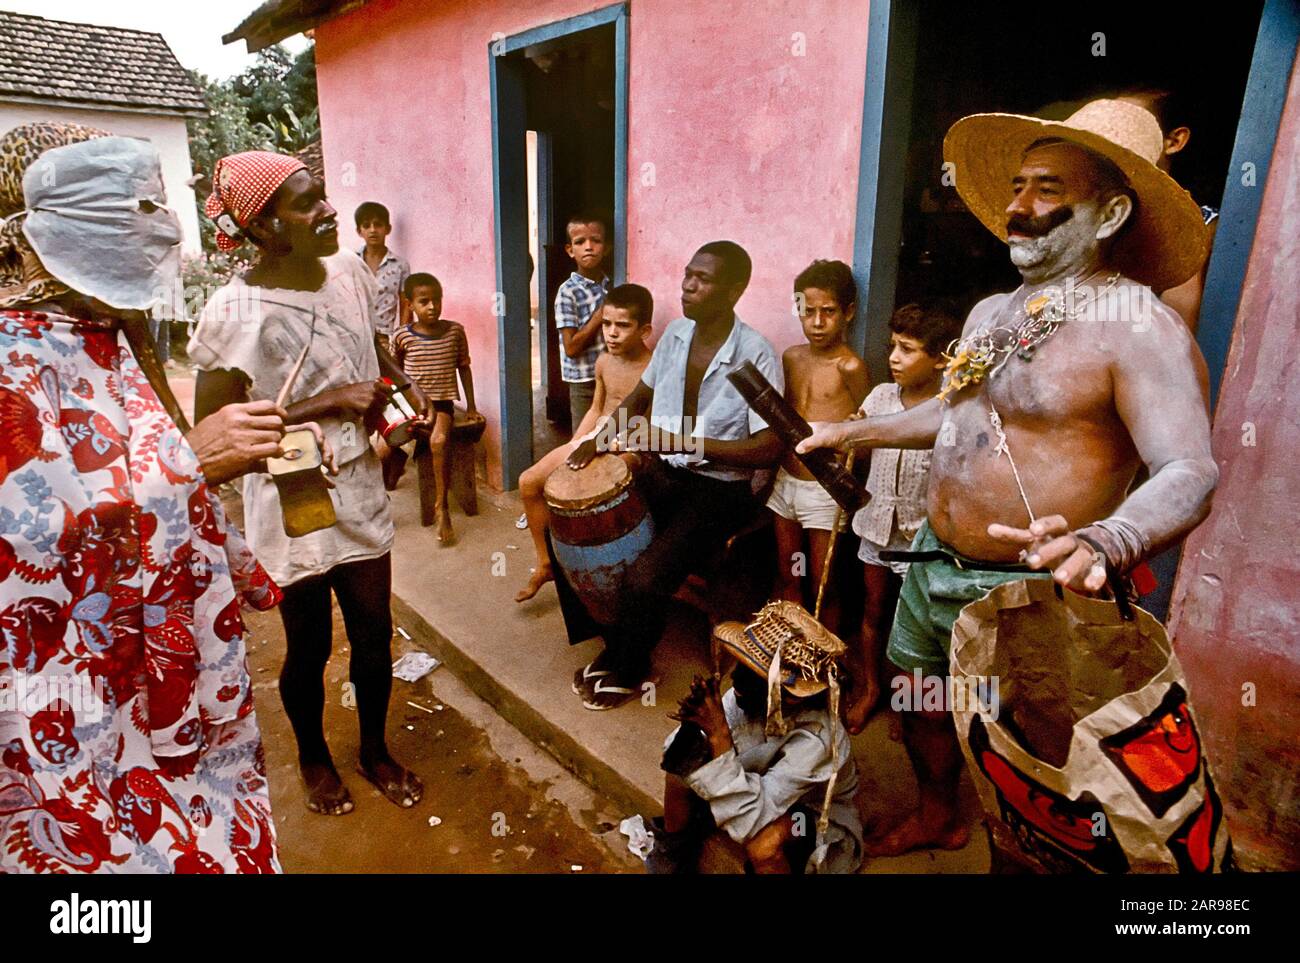 A drummer plays while costumed local villagers hold an informal carnival in rural Brazil's Bahia Provence. The event precedes Lent on the Christian calendar. Stock Photo